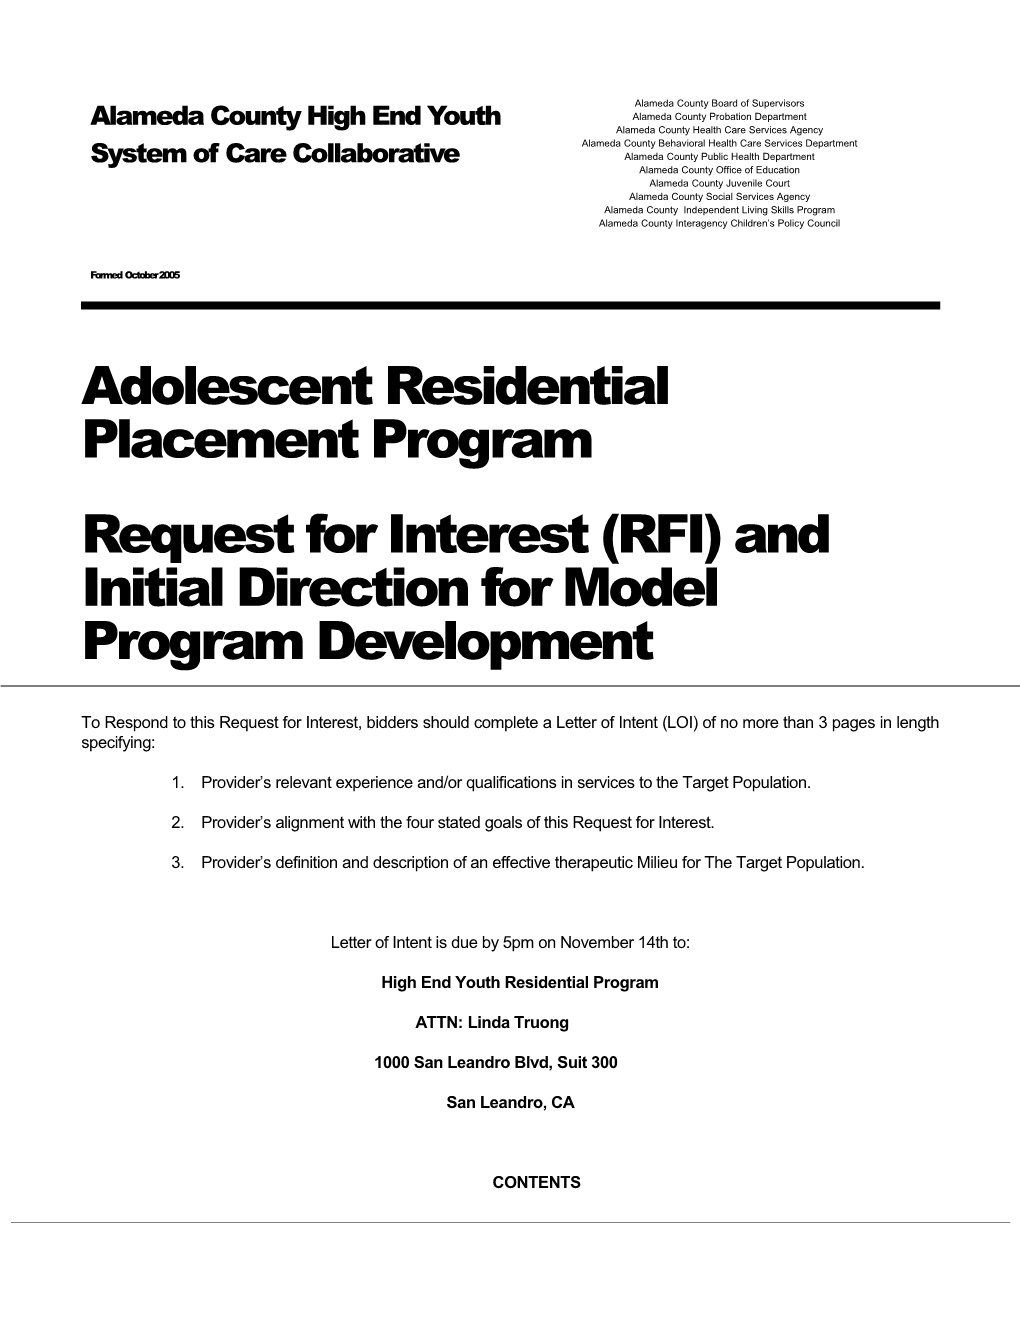 Adolescent Residential Placement Program